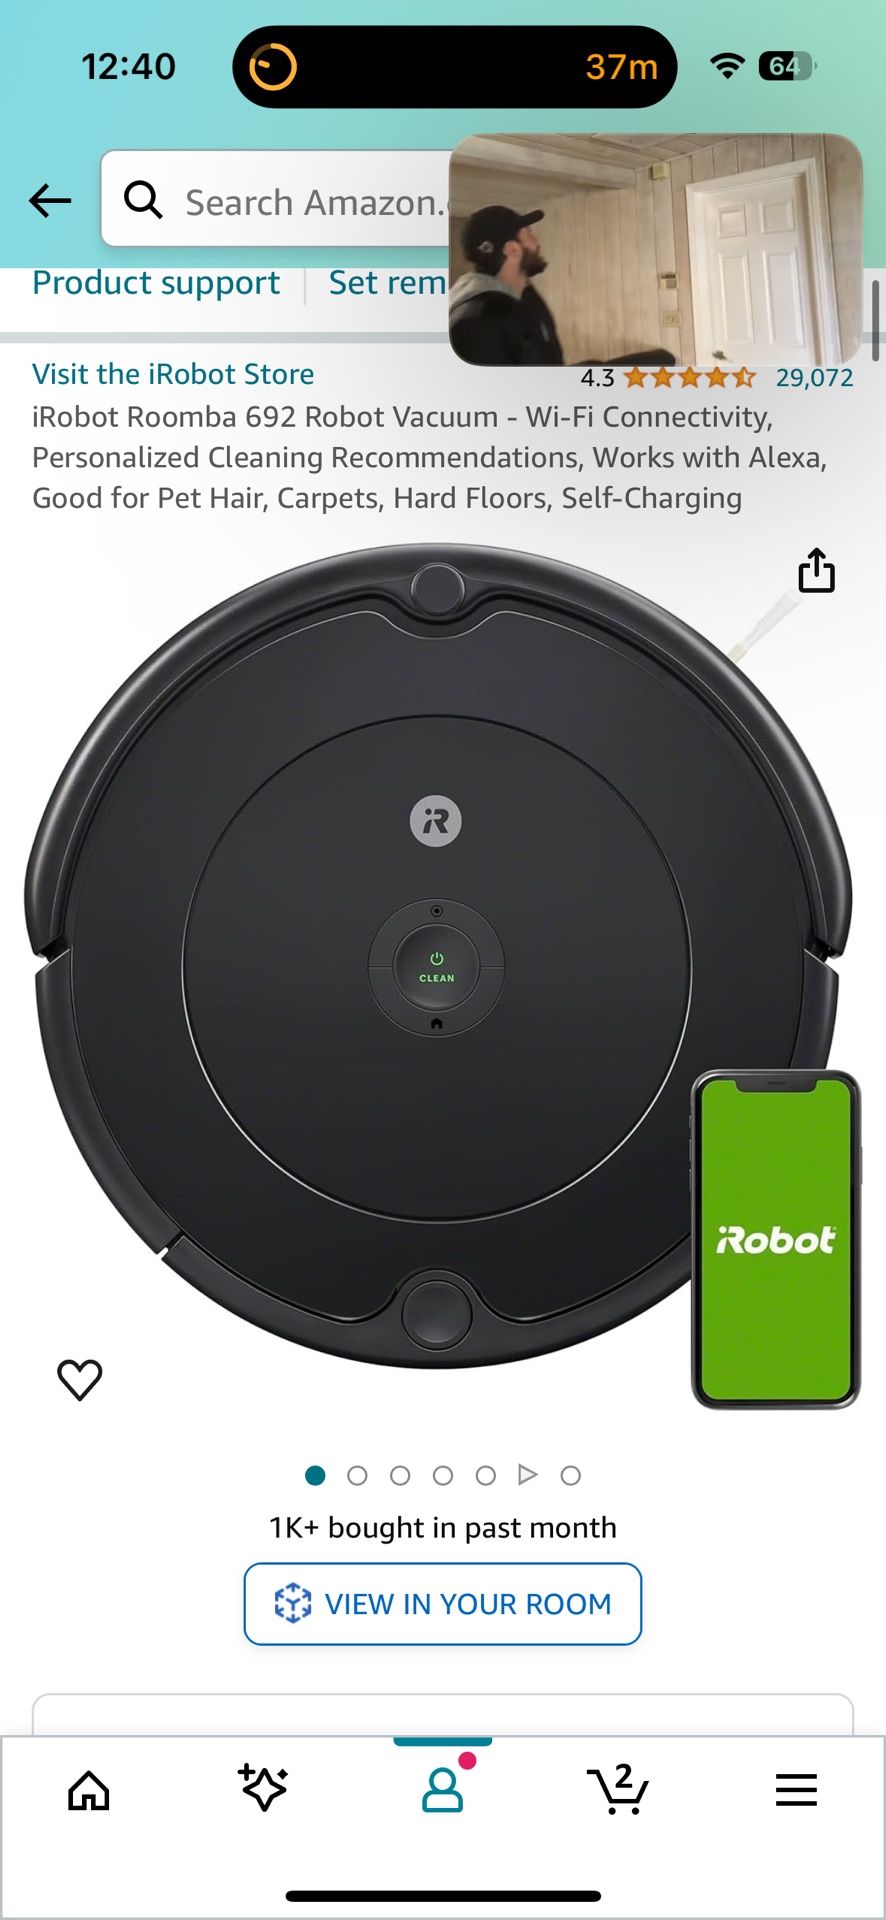 iRobot Roomba 692 Robot Vacuum - Wi-Fi Connectivity, Personalized Cleaning Recommendations, Works with Alexa, Good for Pet Hair, Carpets, Hard Floors,